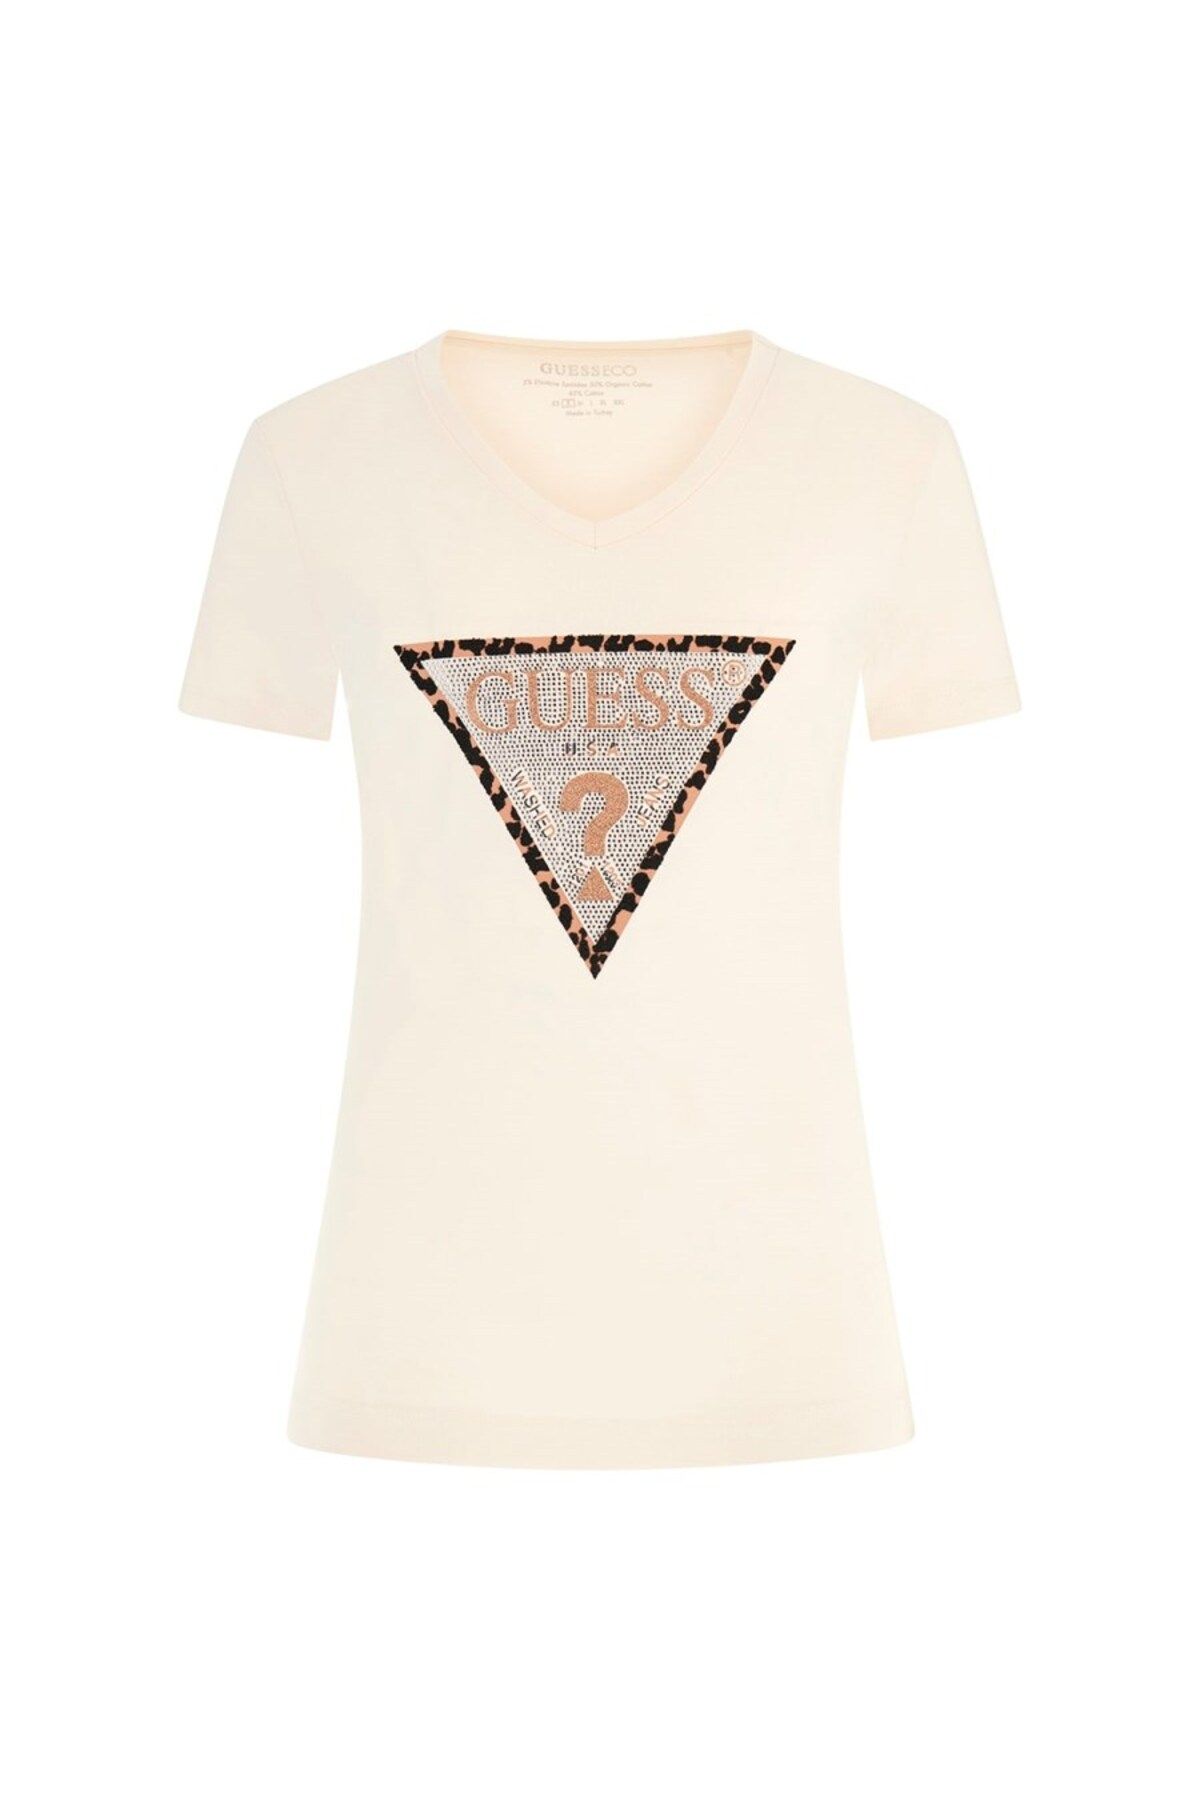 Guess SS VN LEO TRIANGLE T